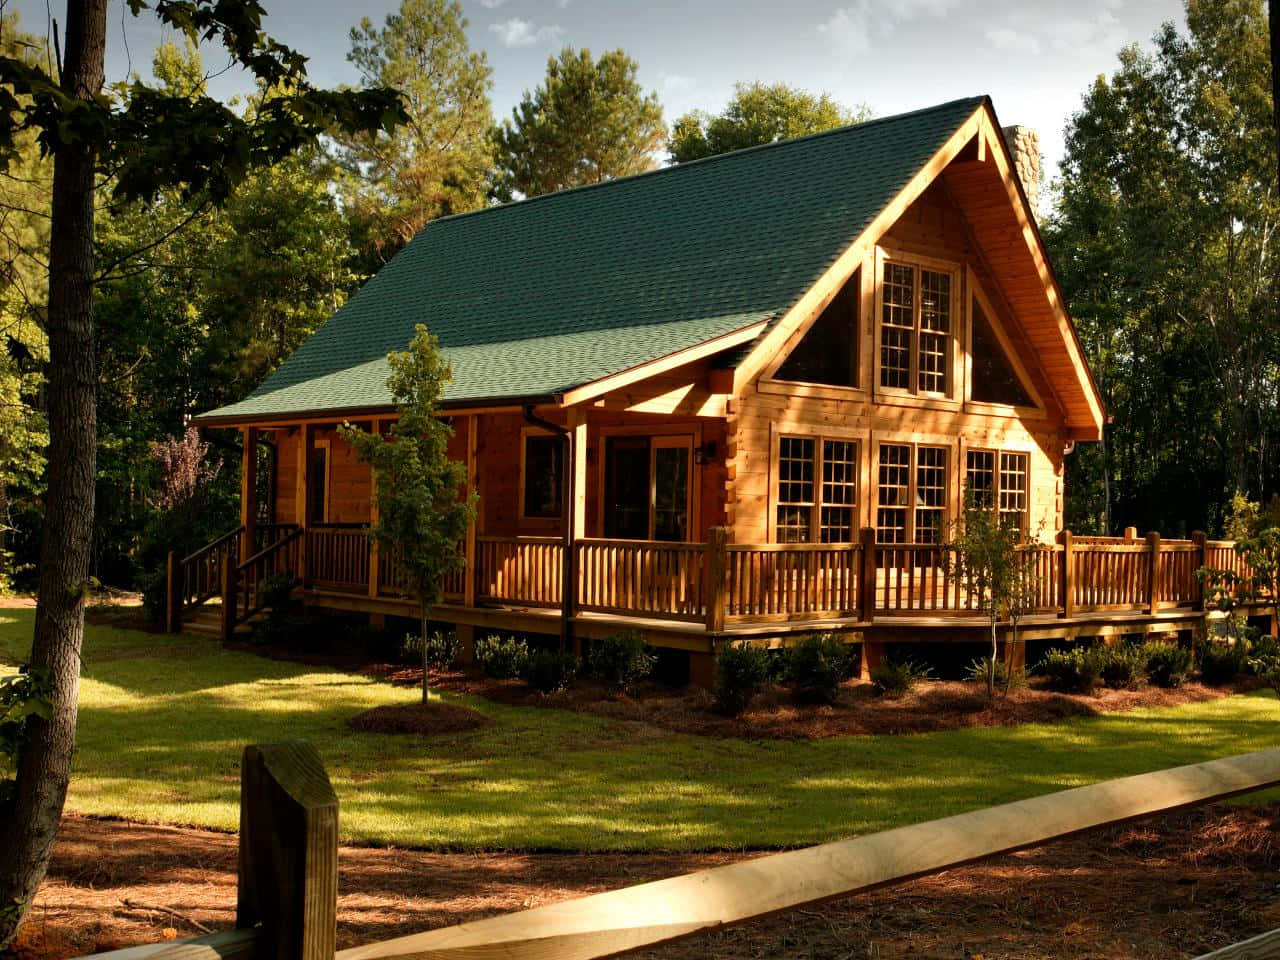 Enjoy the View from This Rustic Log Cabin